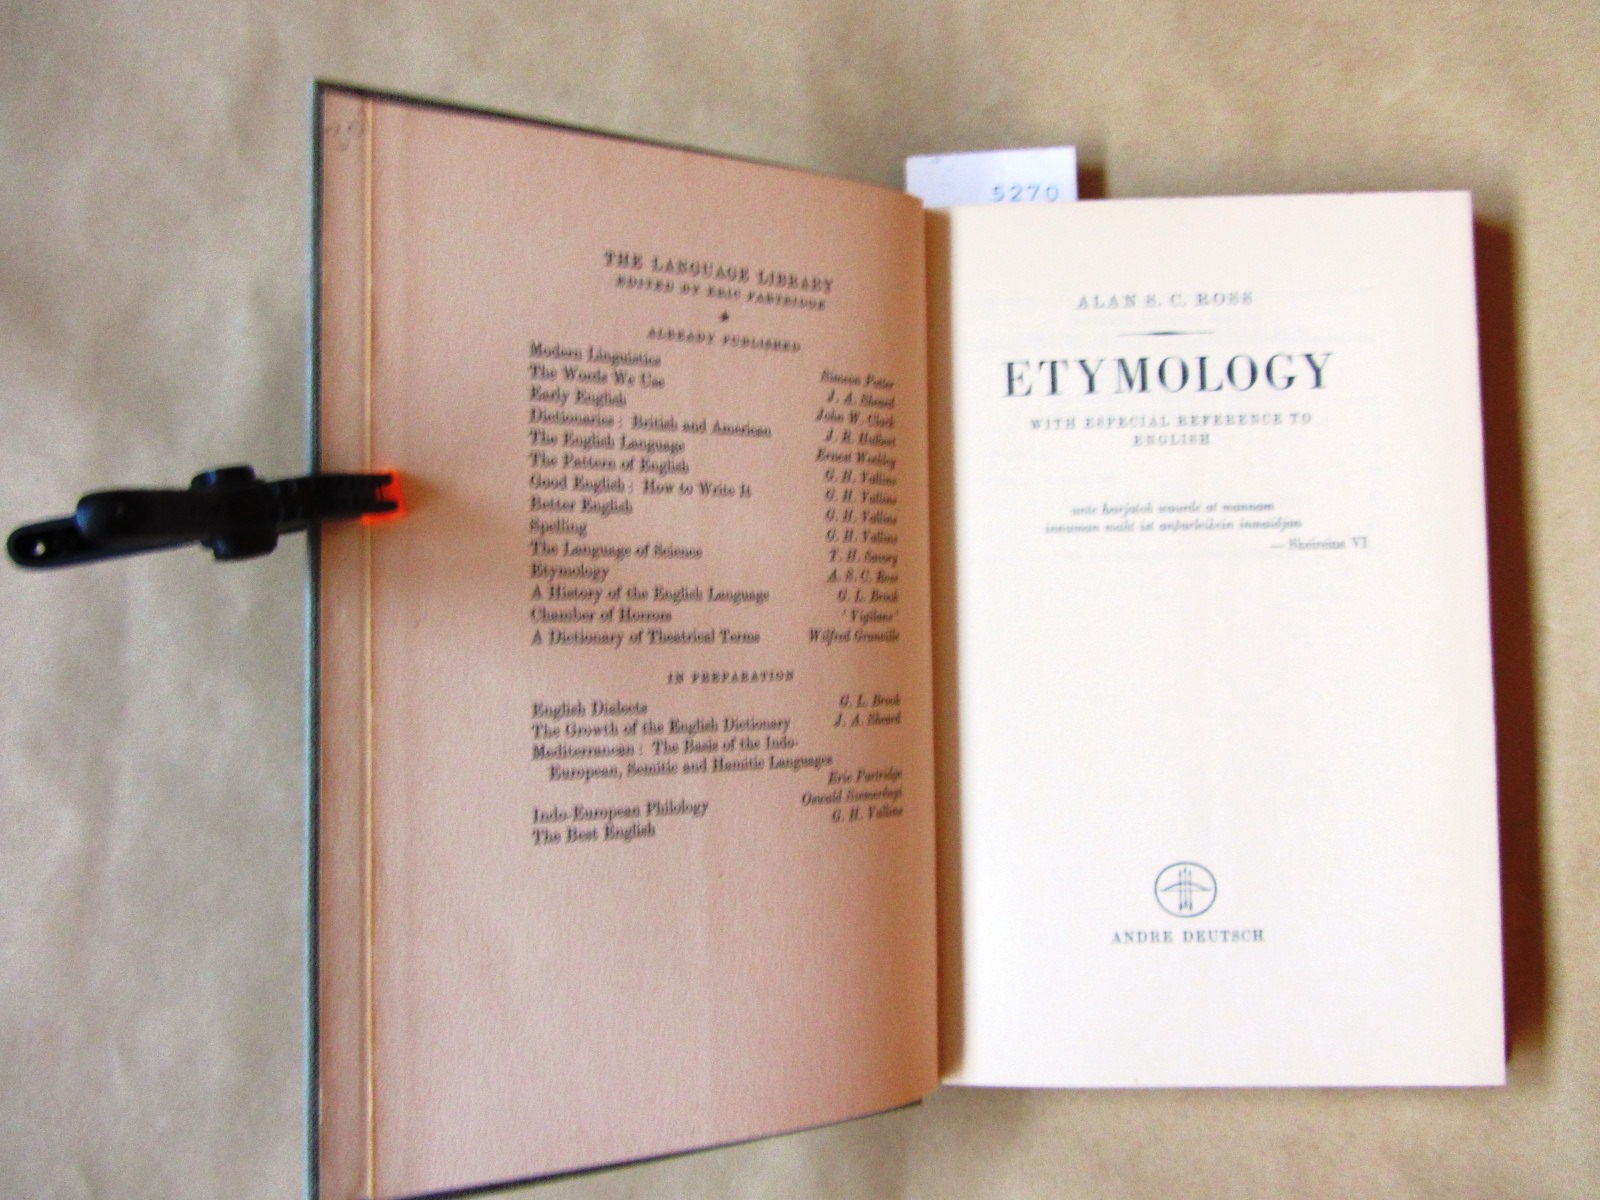 Ross, Alan S. C.:  Etymology. With especial reference to English. 